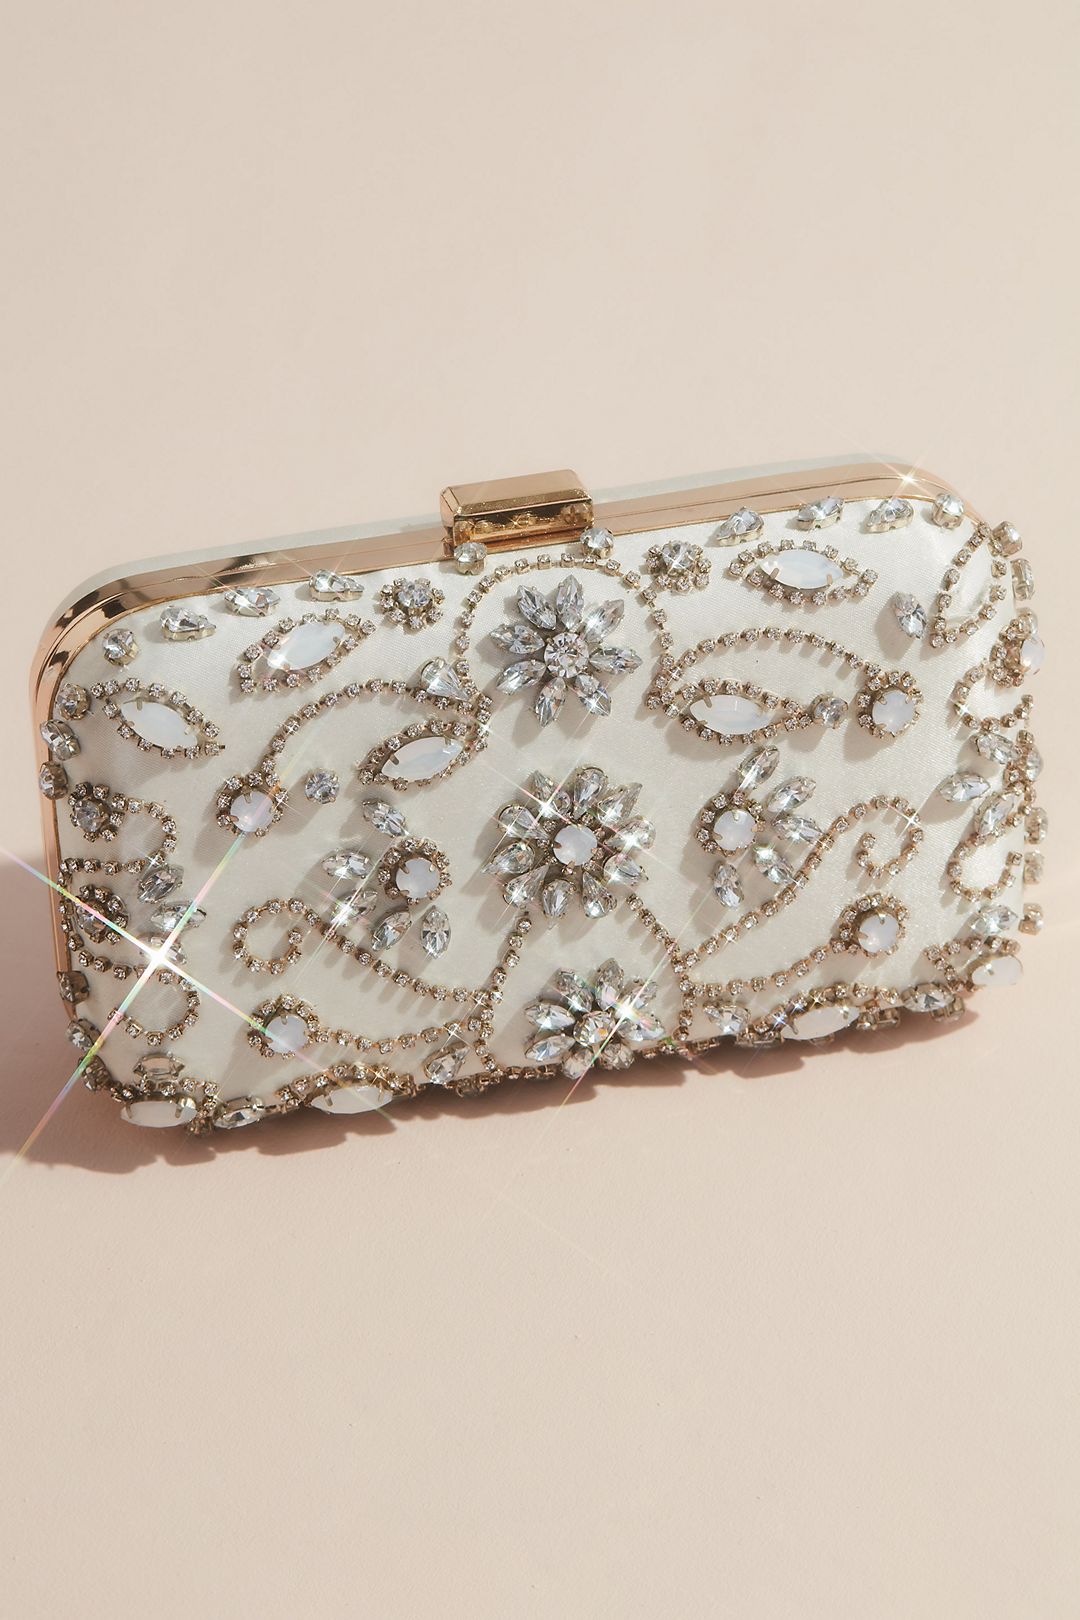 La Regale silver beaded satin lined clutch with chain